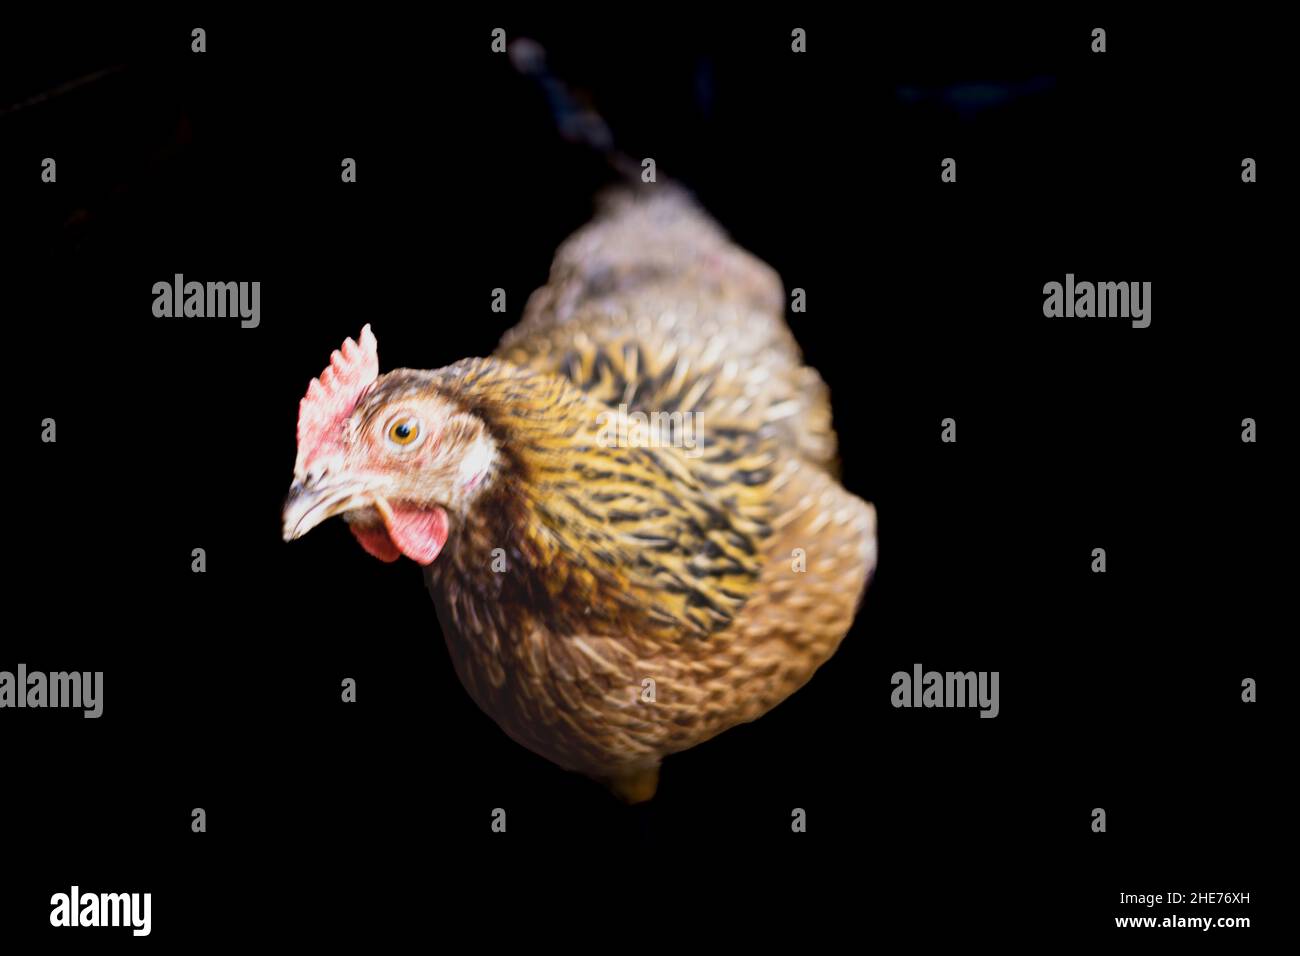 Backyard Chickens in profile with black background Stock Photo